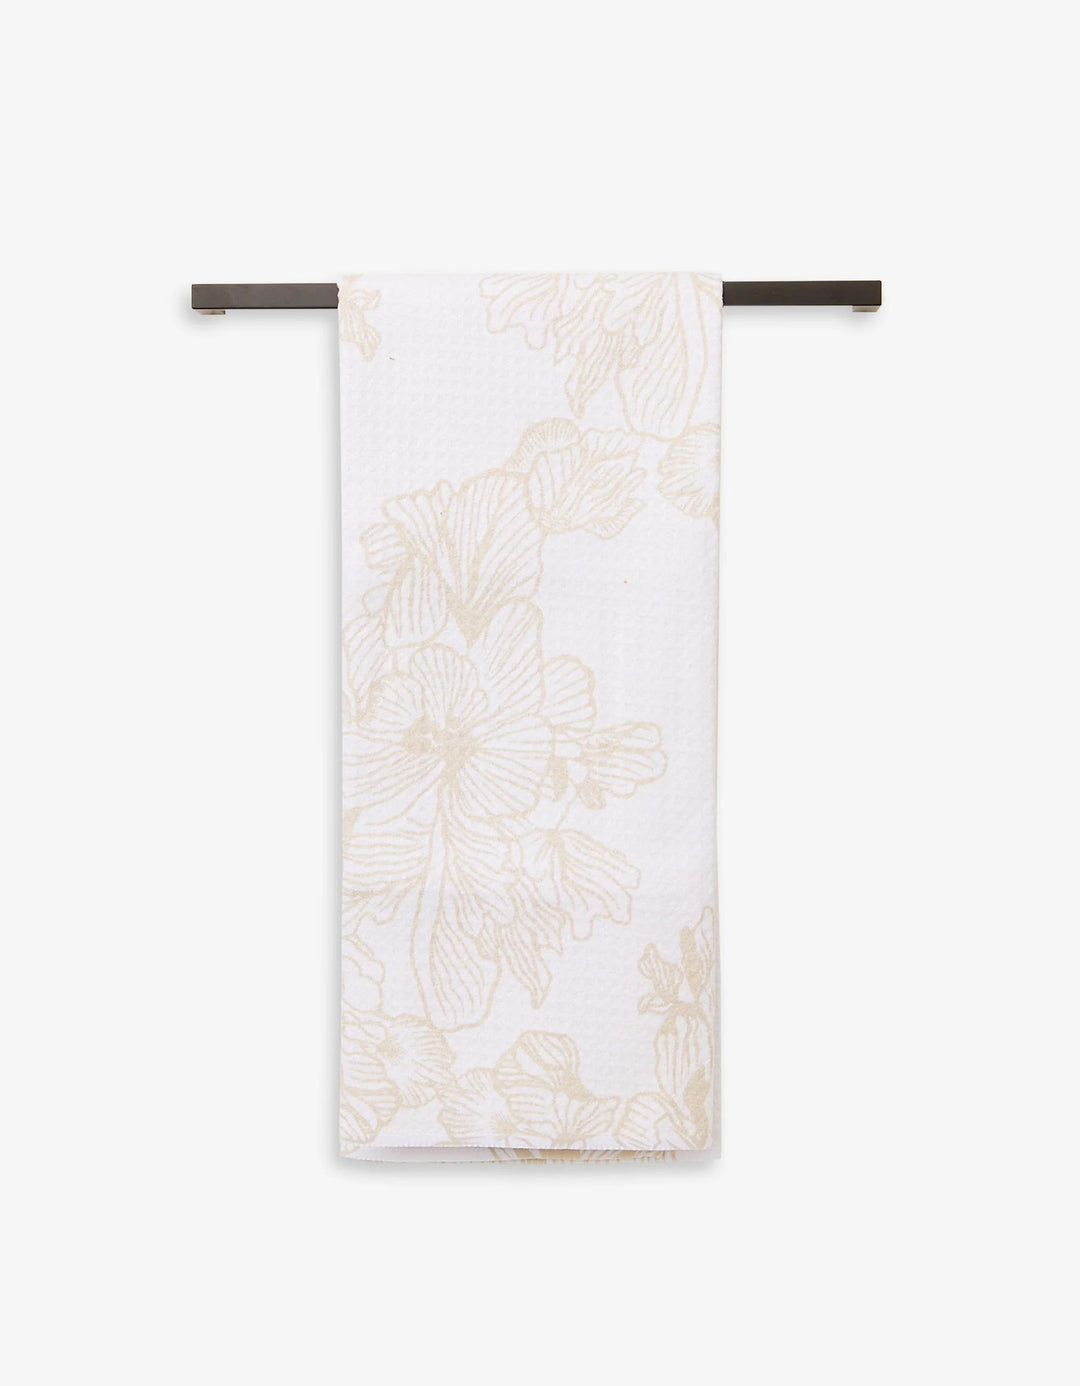 Geometry Kitchen Towels Forever Kitchen Tea Towel